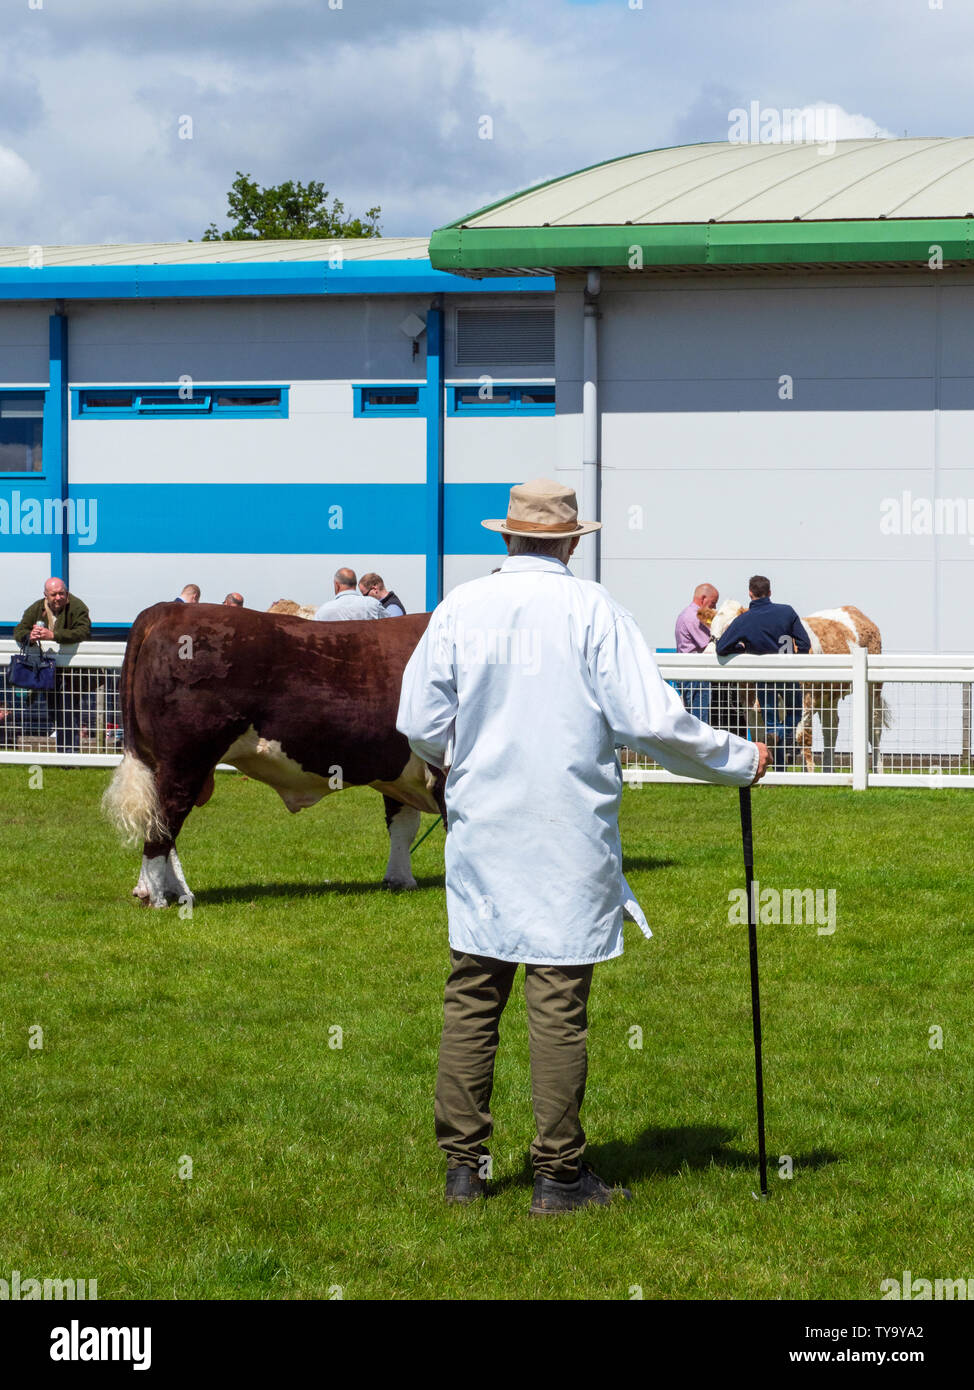 Man Judging Cattle at Show Stock Photo